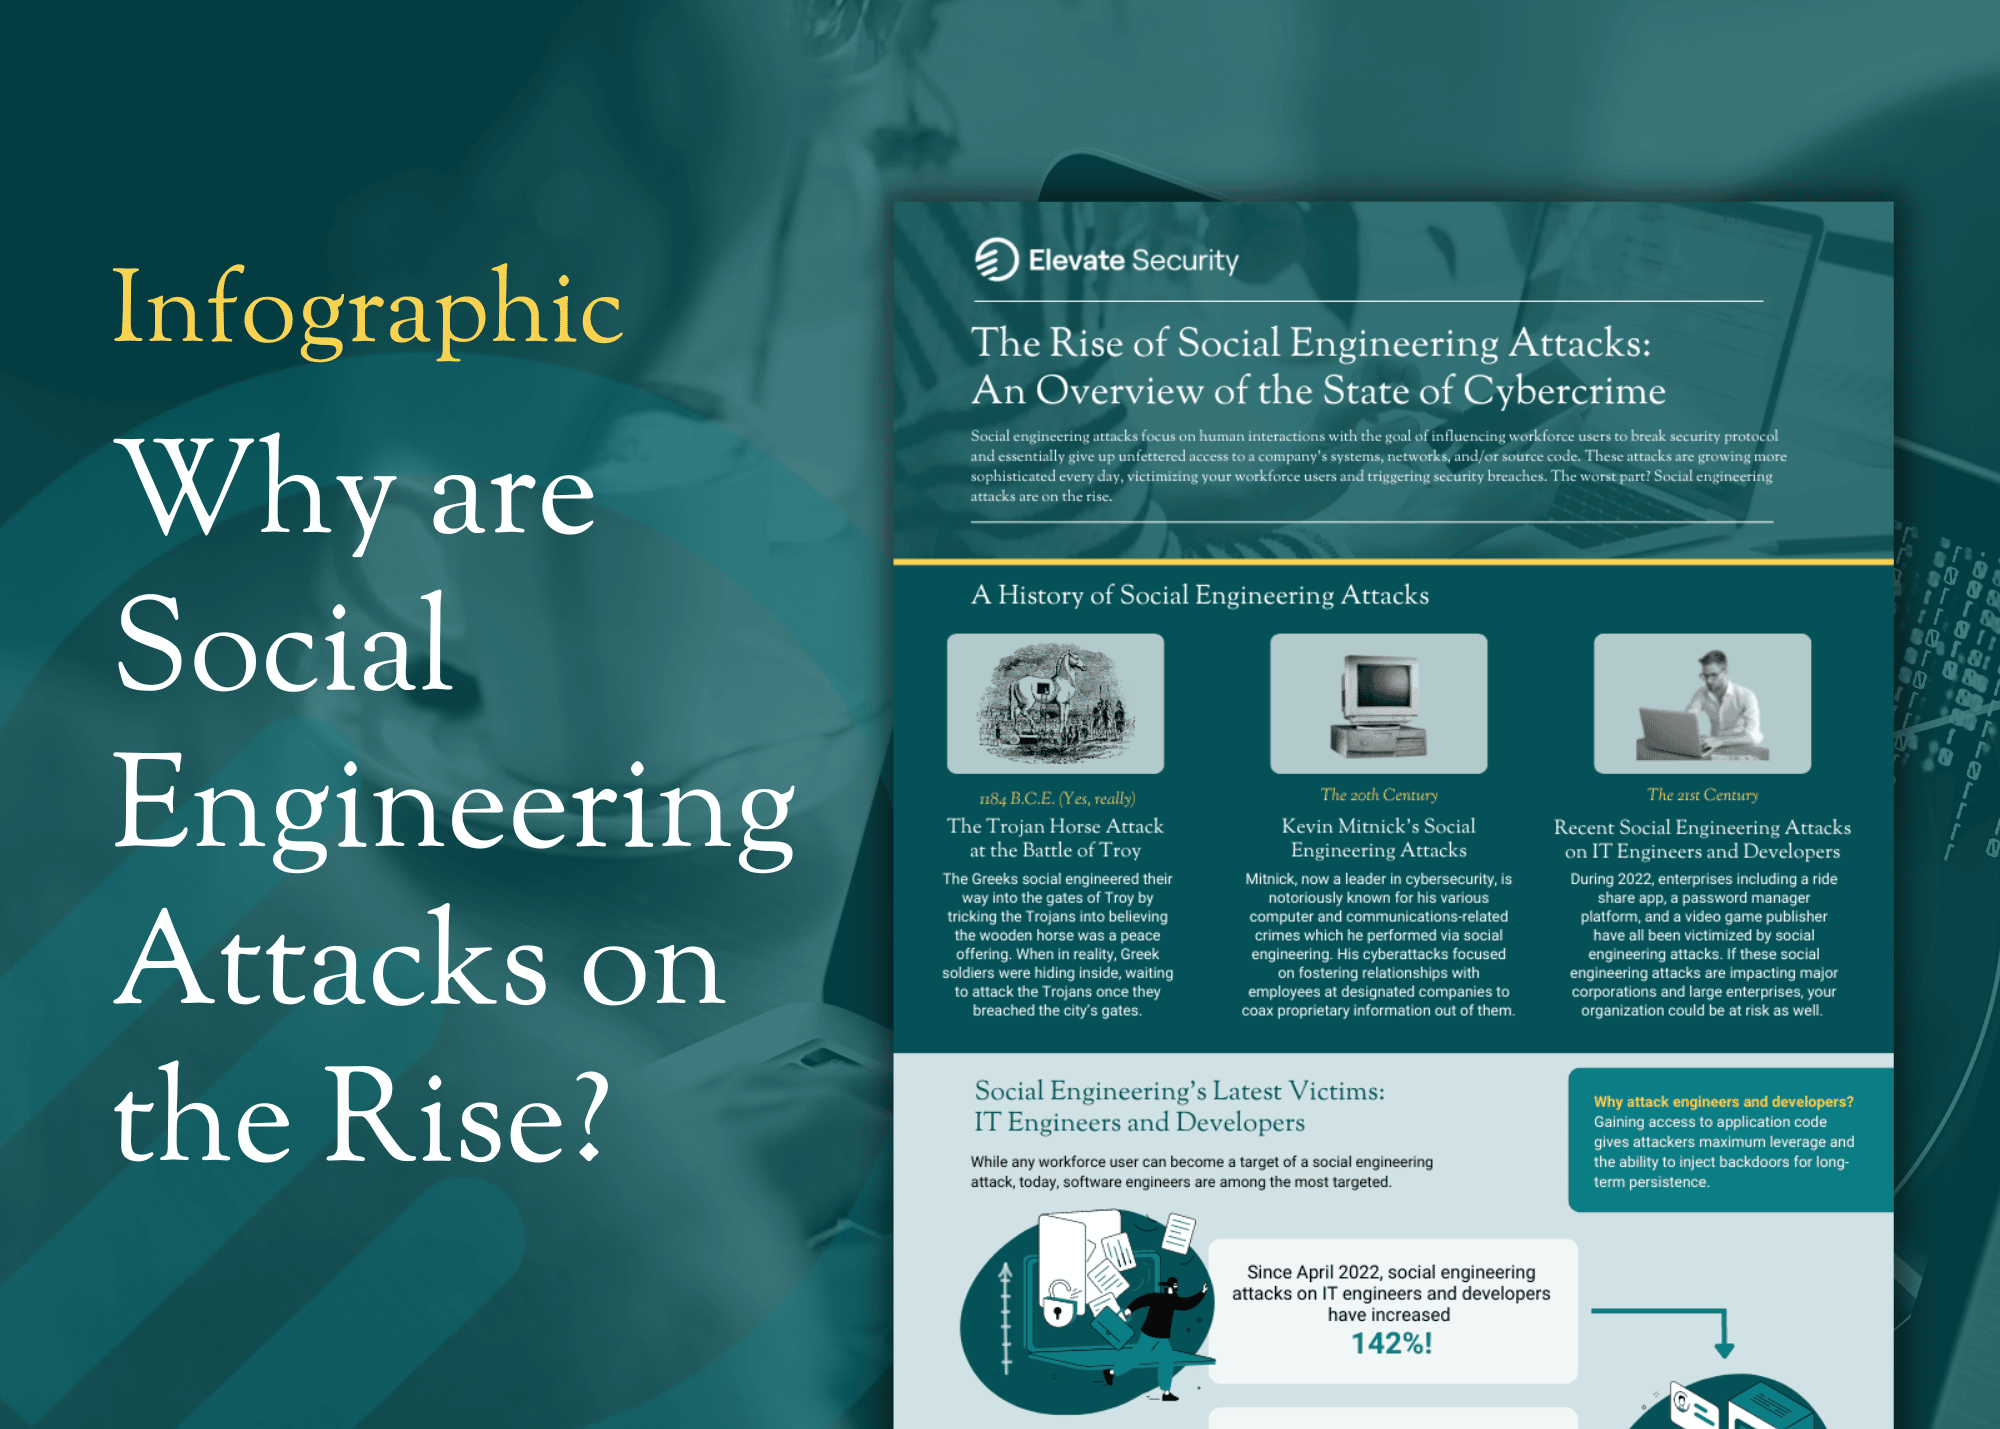 Social engineering attacks have only grown more prevalent and sophisticated. Explore Elevate Security’s insights to learn why.